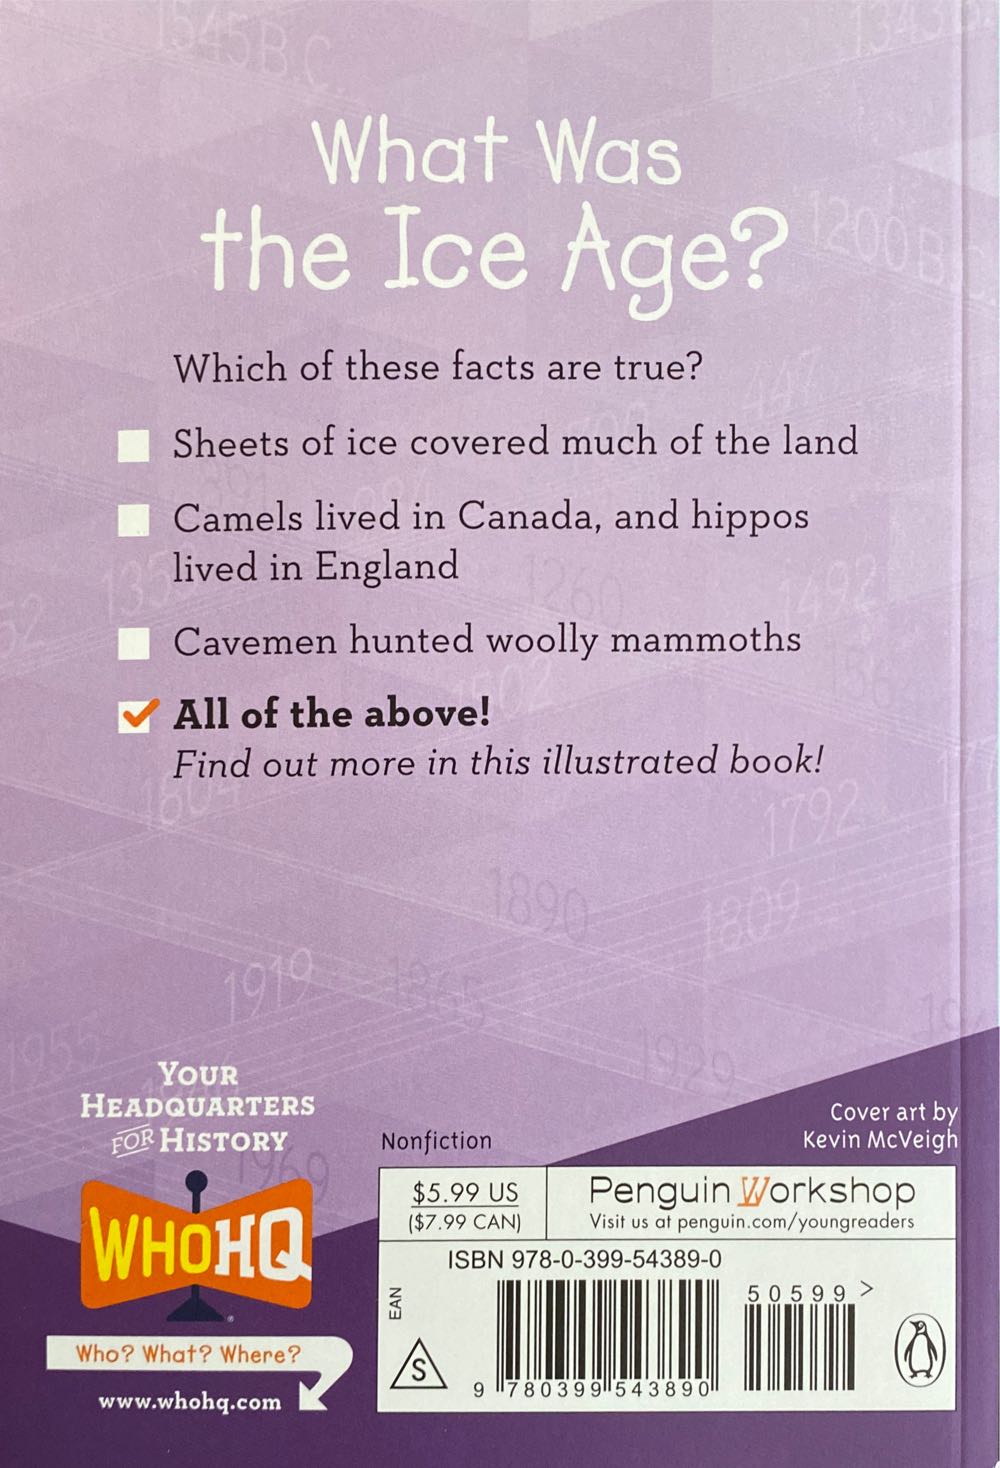 What Was the Ice Age? - Nico Medina (Penguin - Paperback) book collectible [Barcode 9780399543890] - Main Image 2